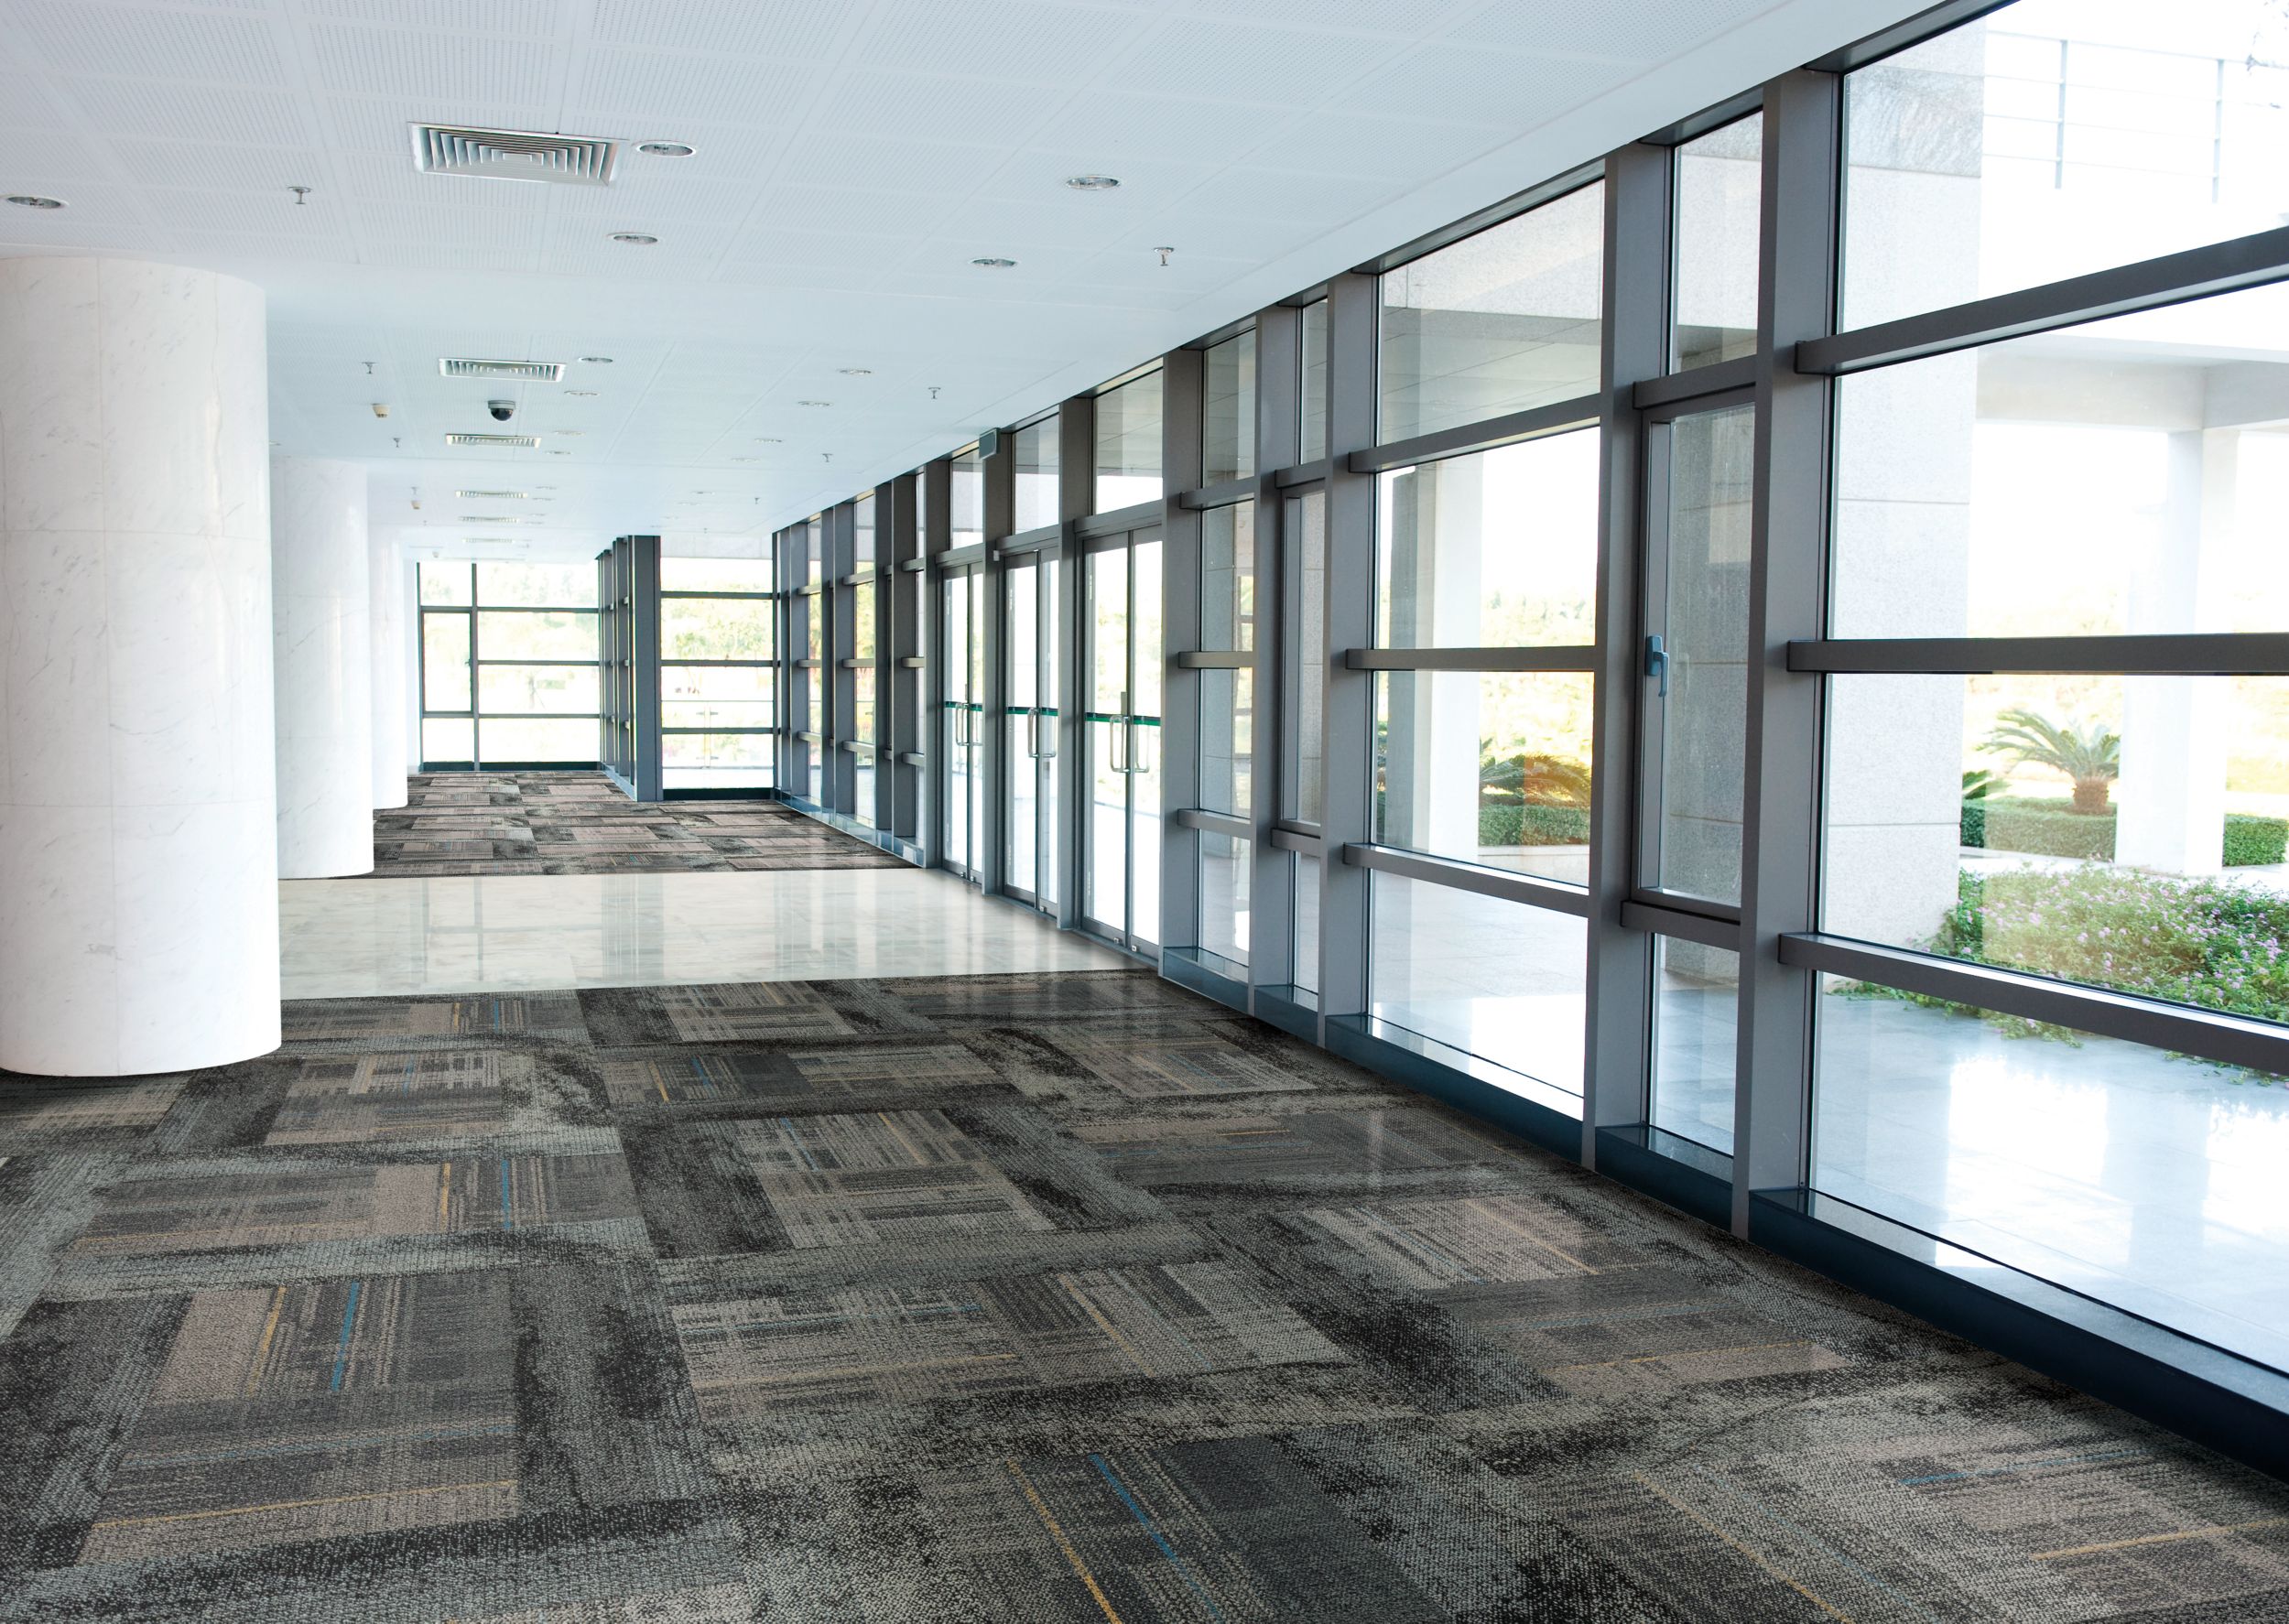 Interface AE312 carpet tile with Neighborhood Smooth plank carpet tile and Interface Textured Stones LVT in corridor with glass walls imagen número 13